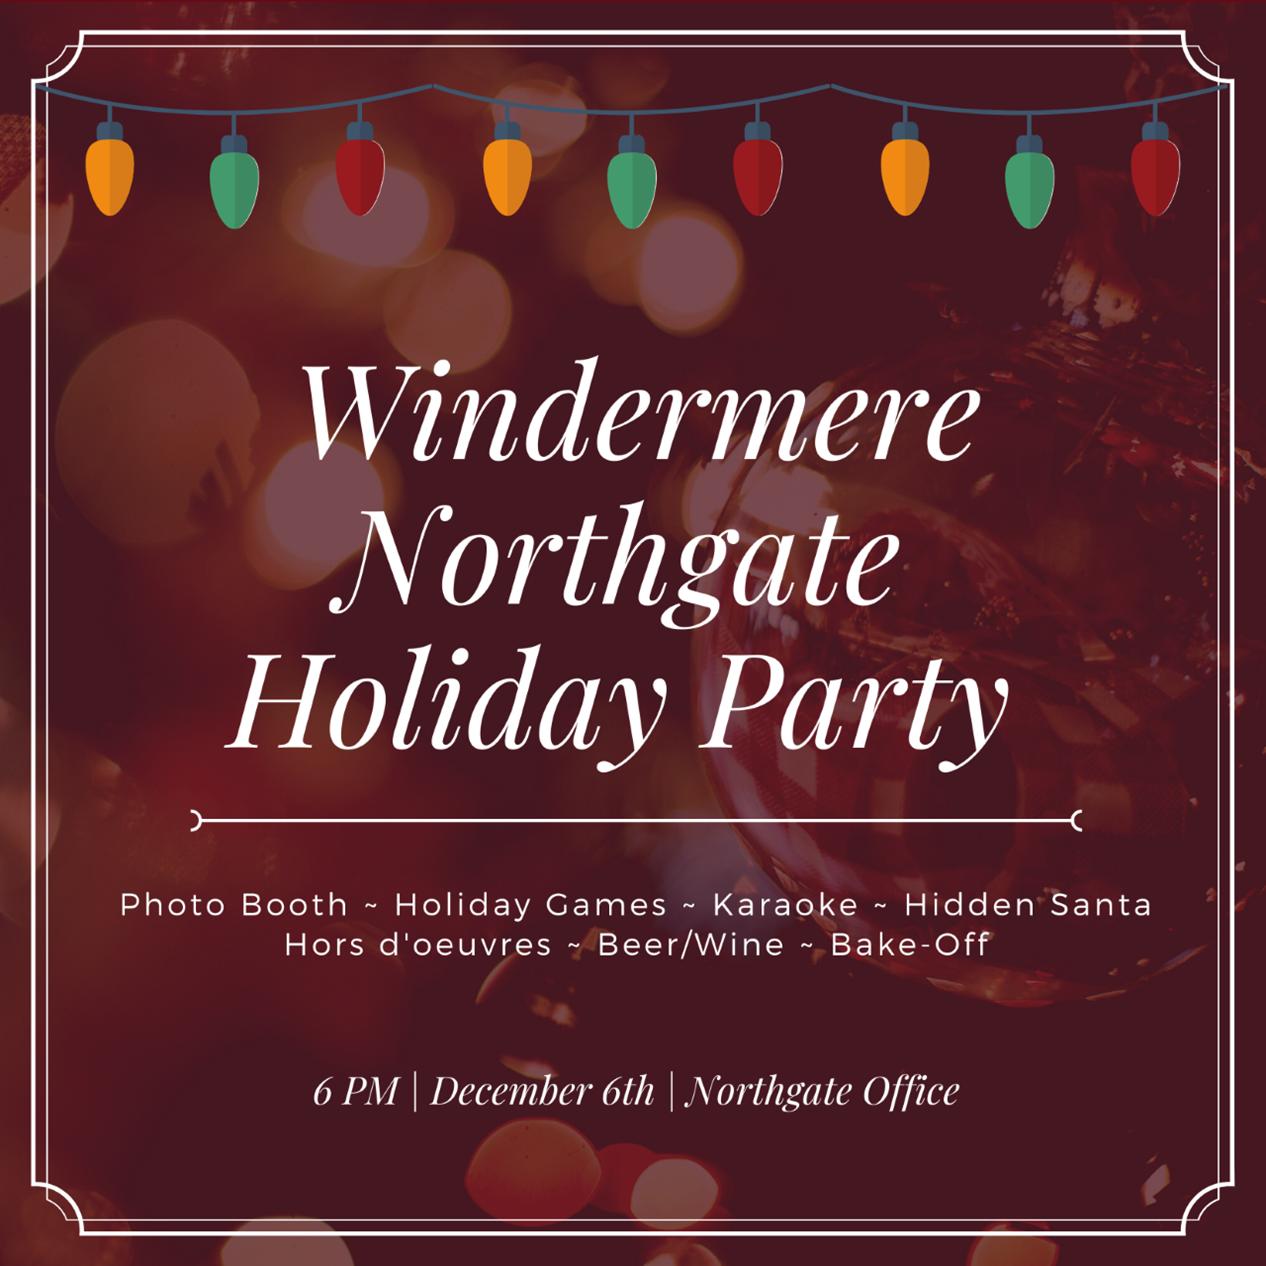 Holiday Party Invite